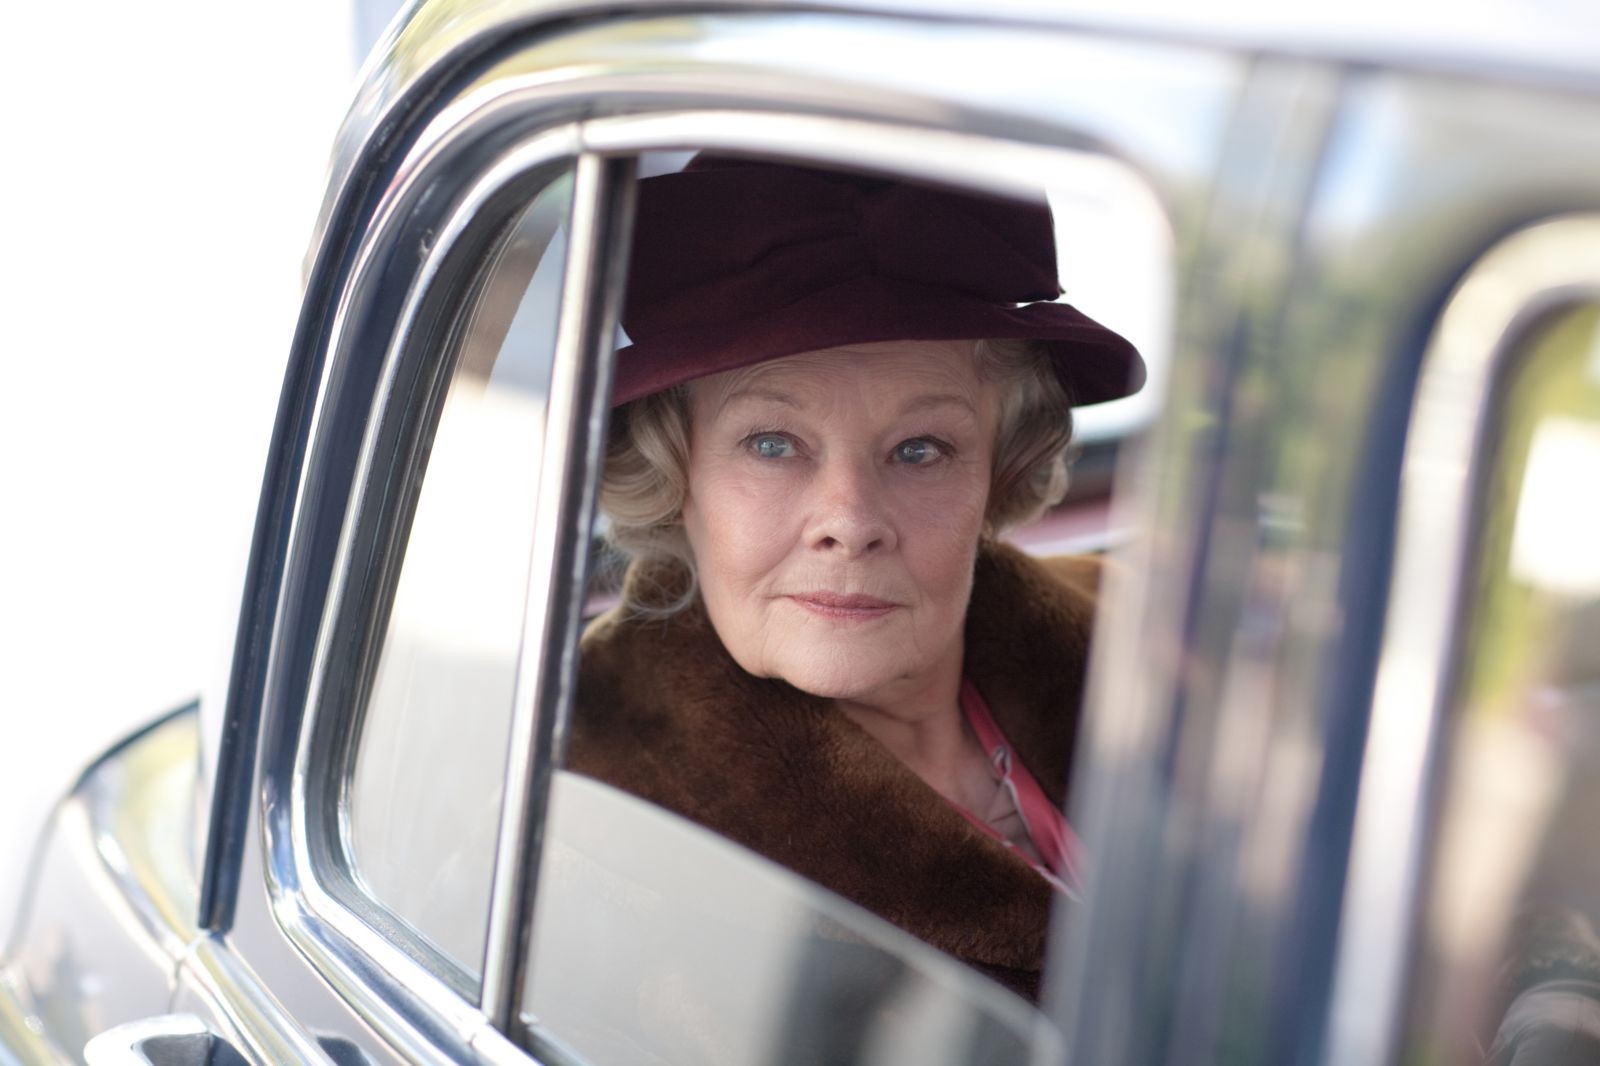 Judi Dench stars as Dame Sybil Thorndike in The Weinstein Company's My Week with Marilyn (2011). Photo credit by Laurence Cendrowicz.